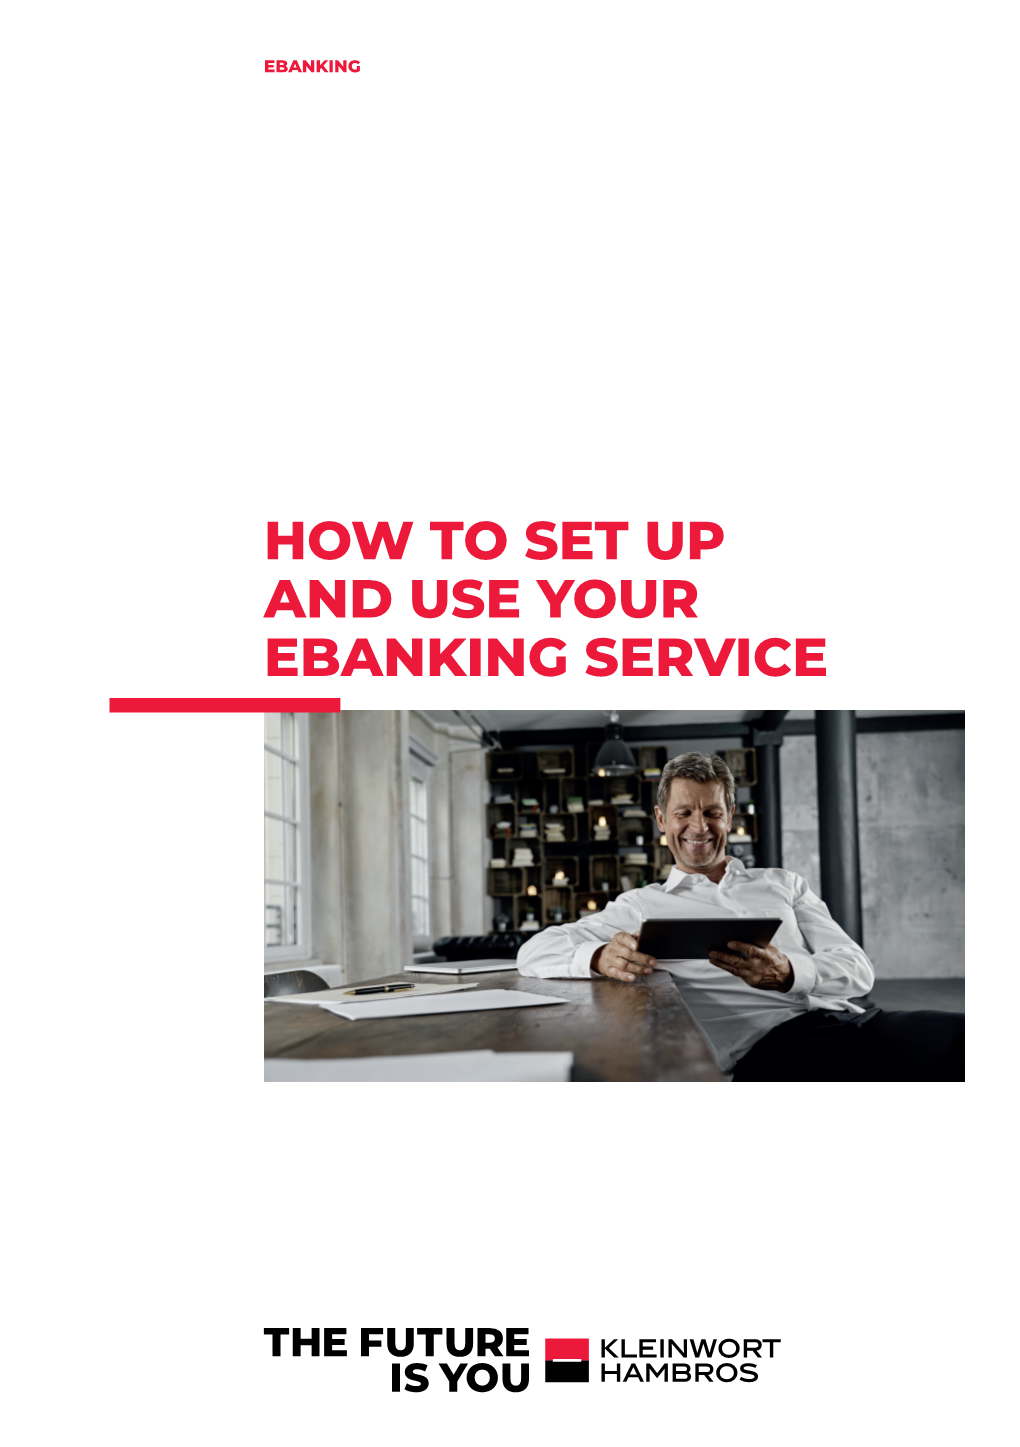 Please See Our Ebanking User Guide